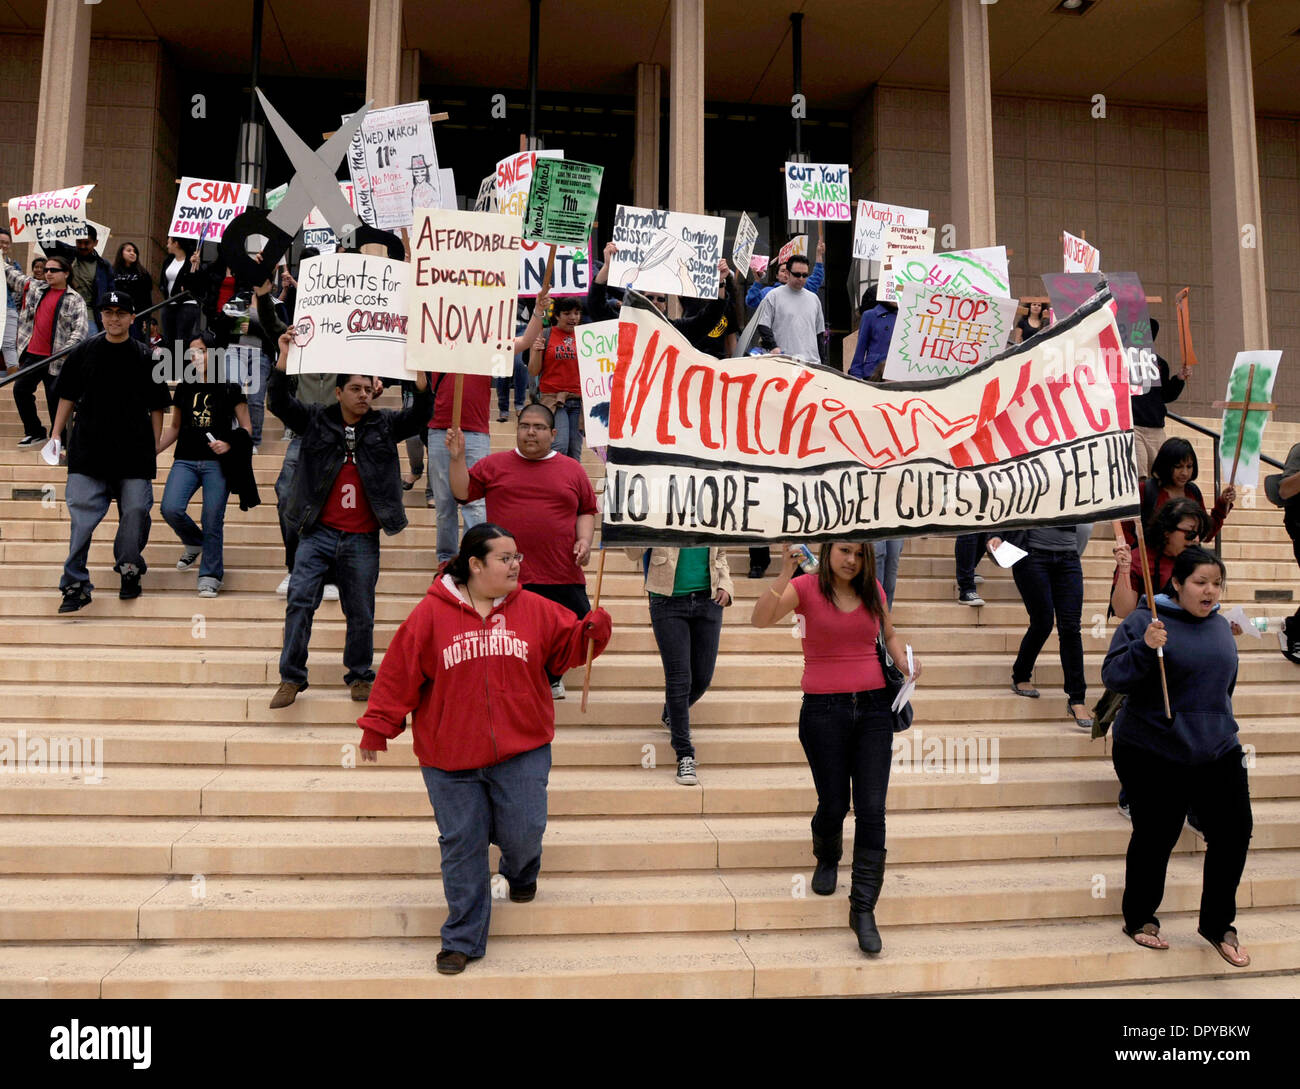 Mar 11, 2009 - Northridge, California, USA - Students march down the front steps of the Oviat Library at California State University Northridge while protesting budget cuts. Northridge, CA 3-11-2009. (Credit Image: © John McCoy/Los Angeles Daily News/ZUMA Press) RESTRICTIONS: * USA Tabloids Rights OUT * Stock Photo